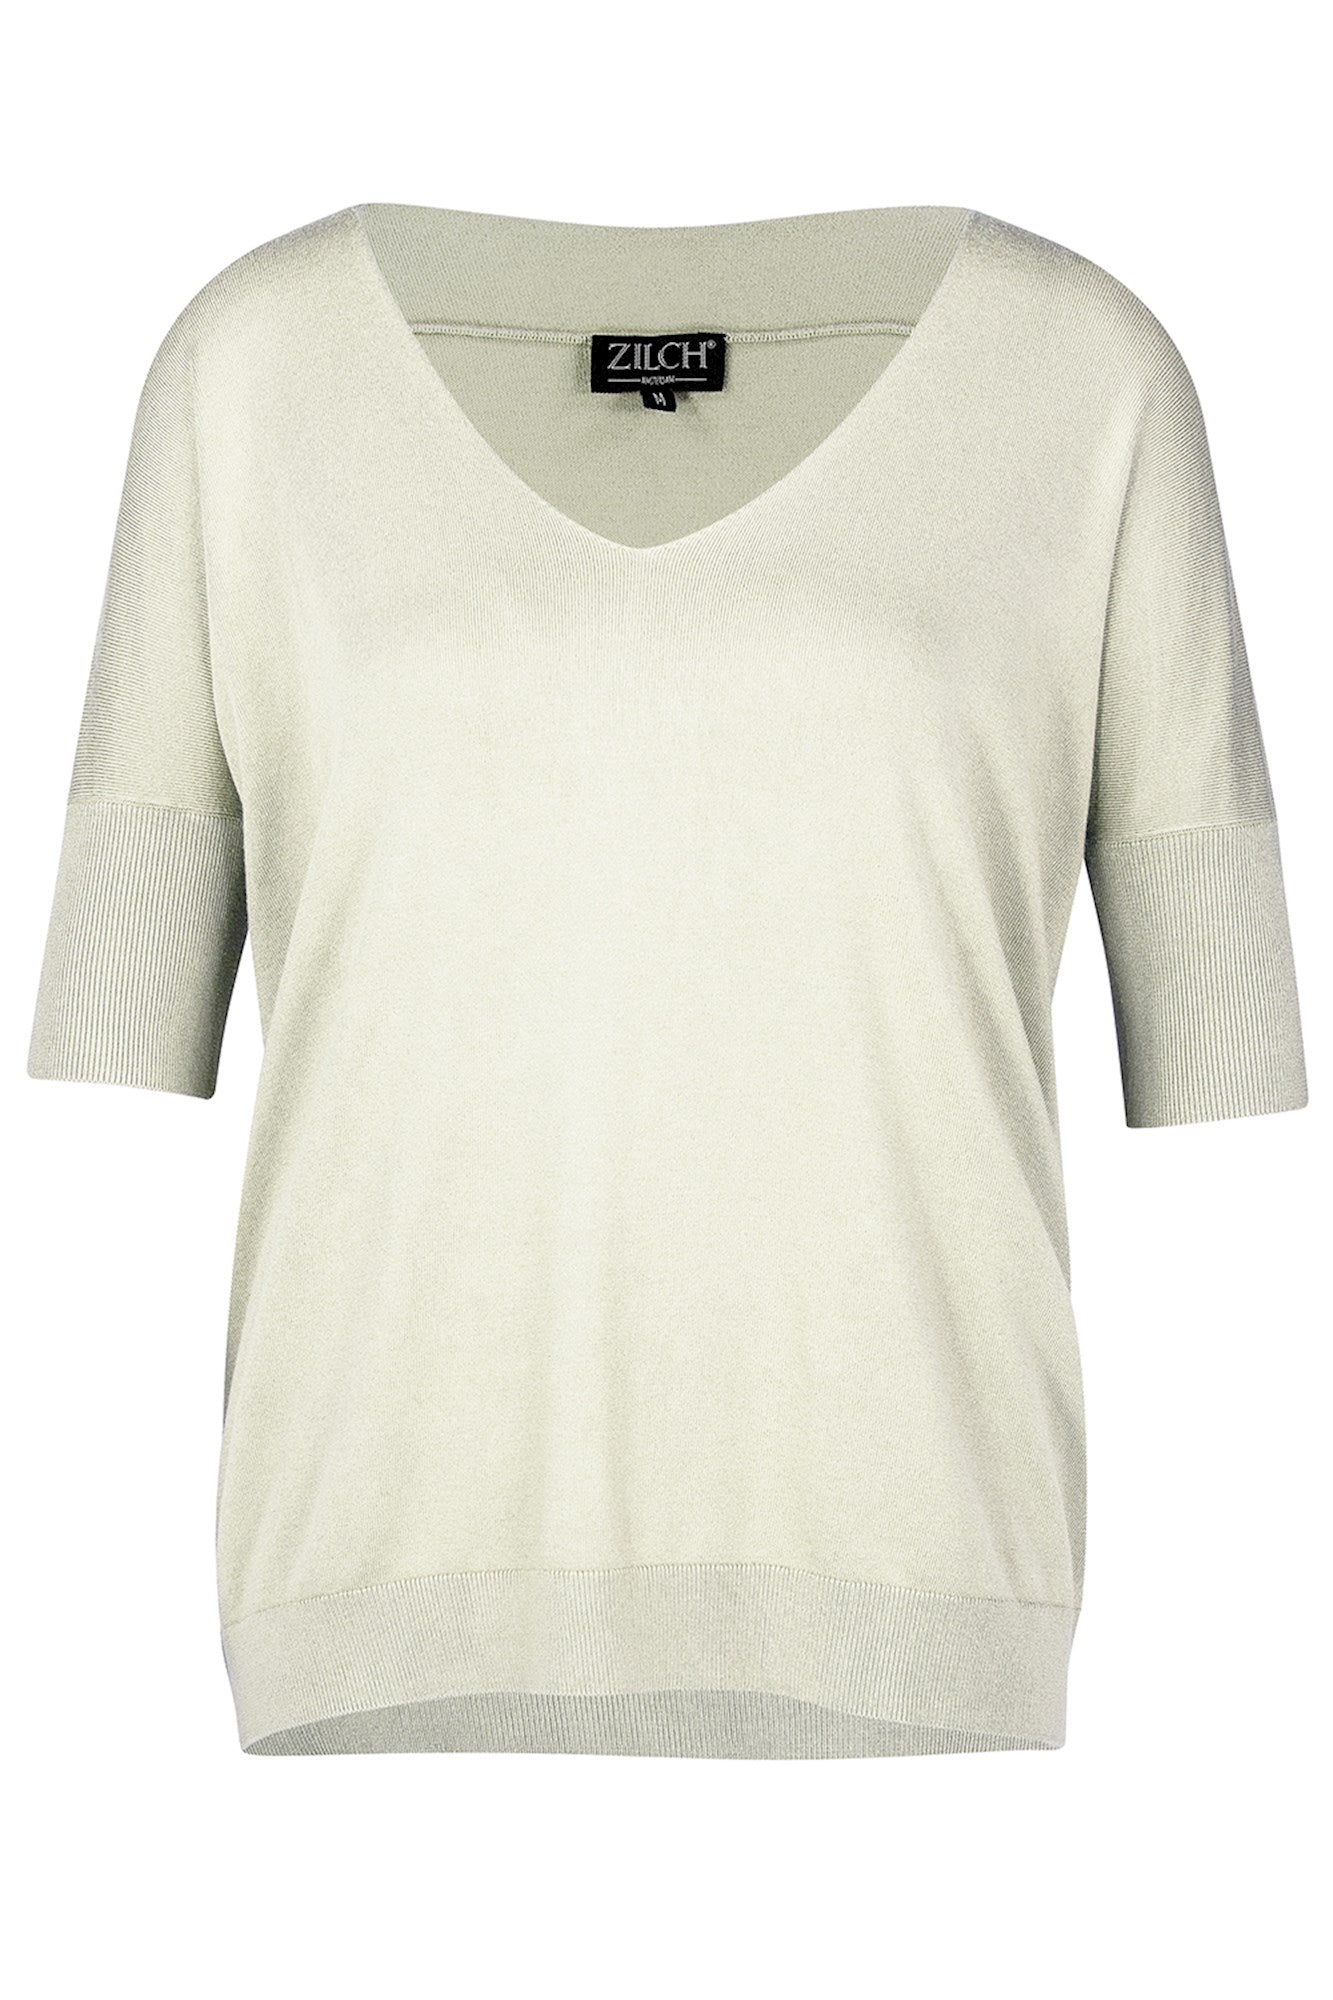 ZILCH Off White Bamboo V-Neck Top